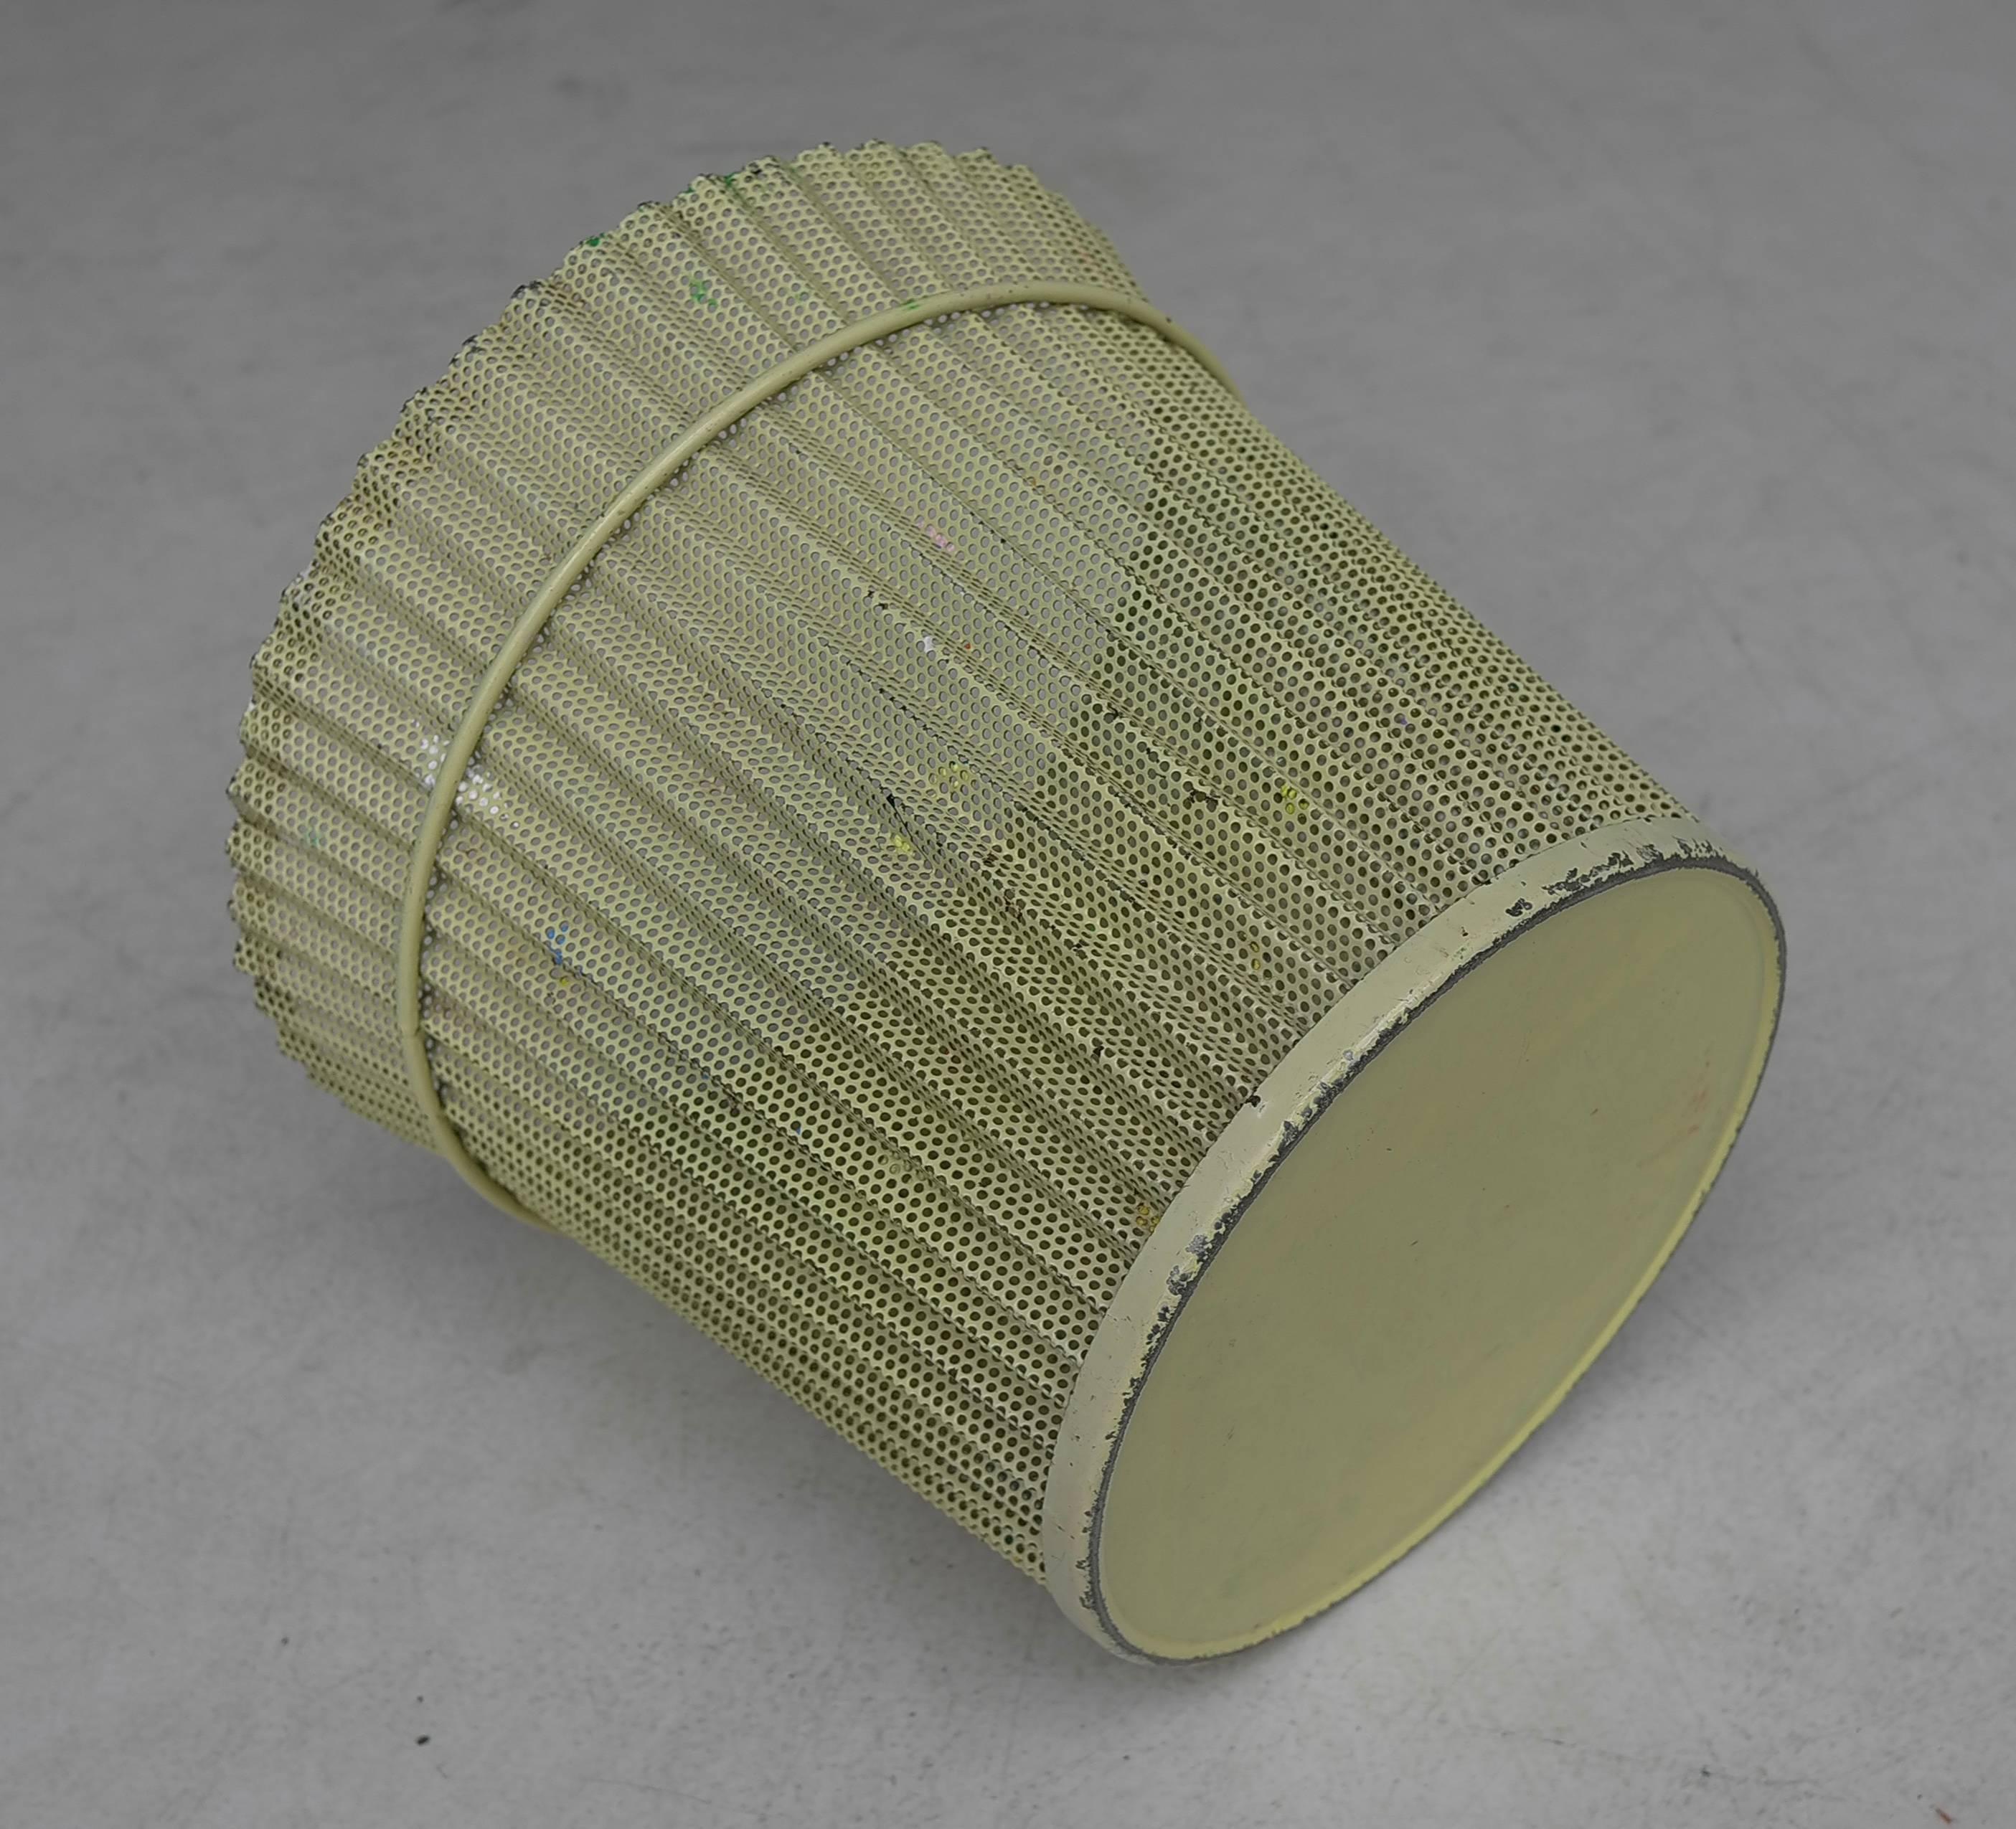 Large Mathieu Matégot wastepaper basket, all original and rare in yellow metal and in this large size.